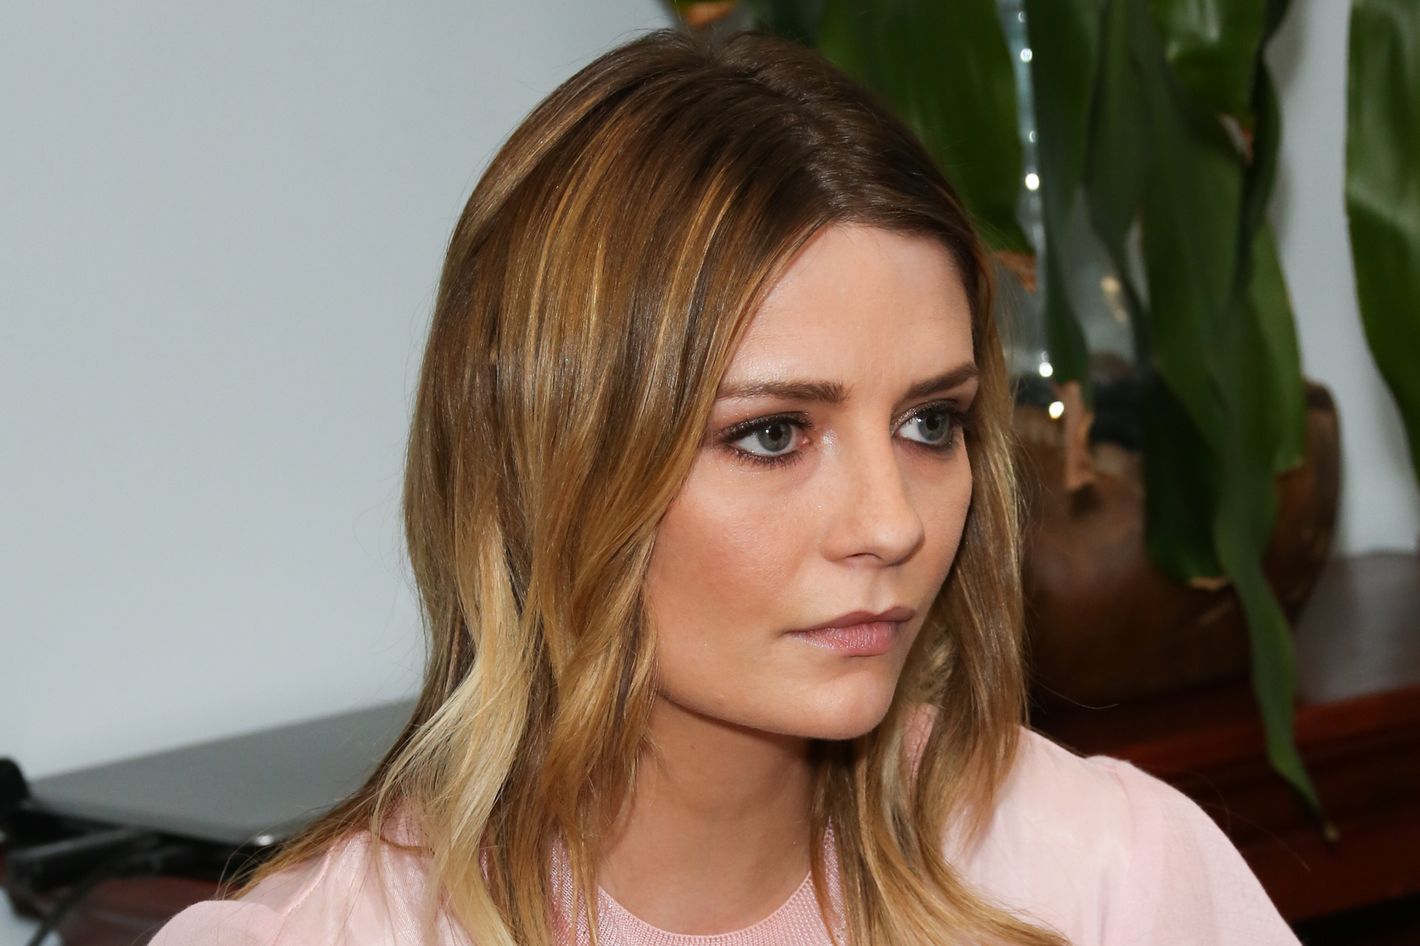 2x Sex Video Girl - Mischa Barton Gets Restraining Orders Against Two Exes